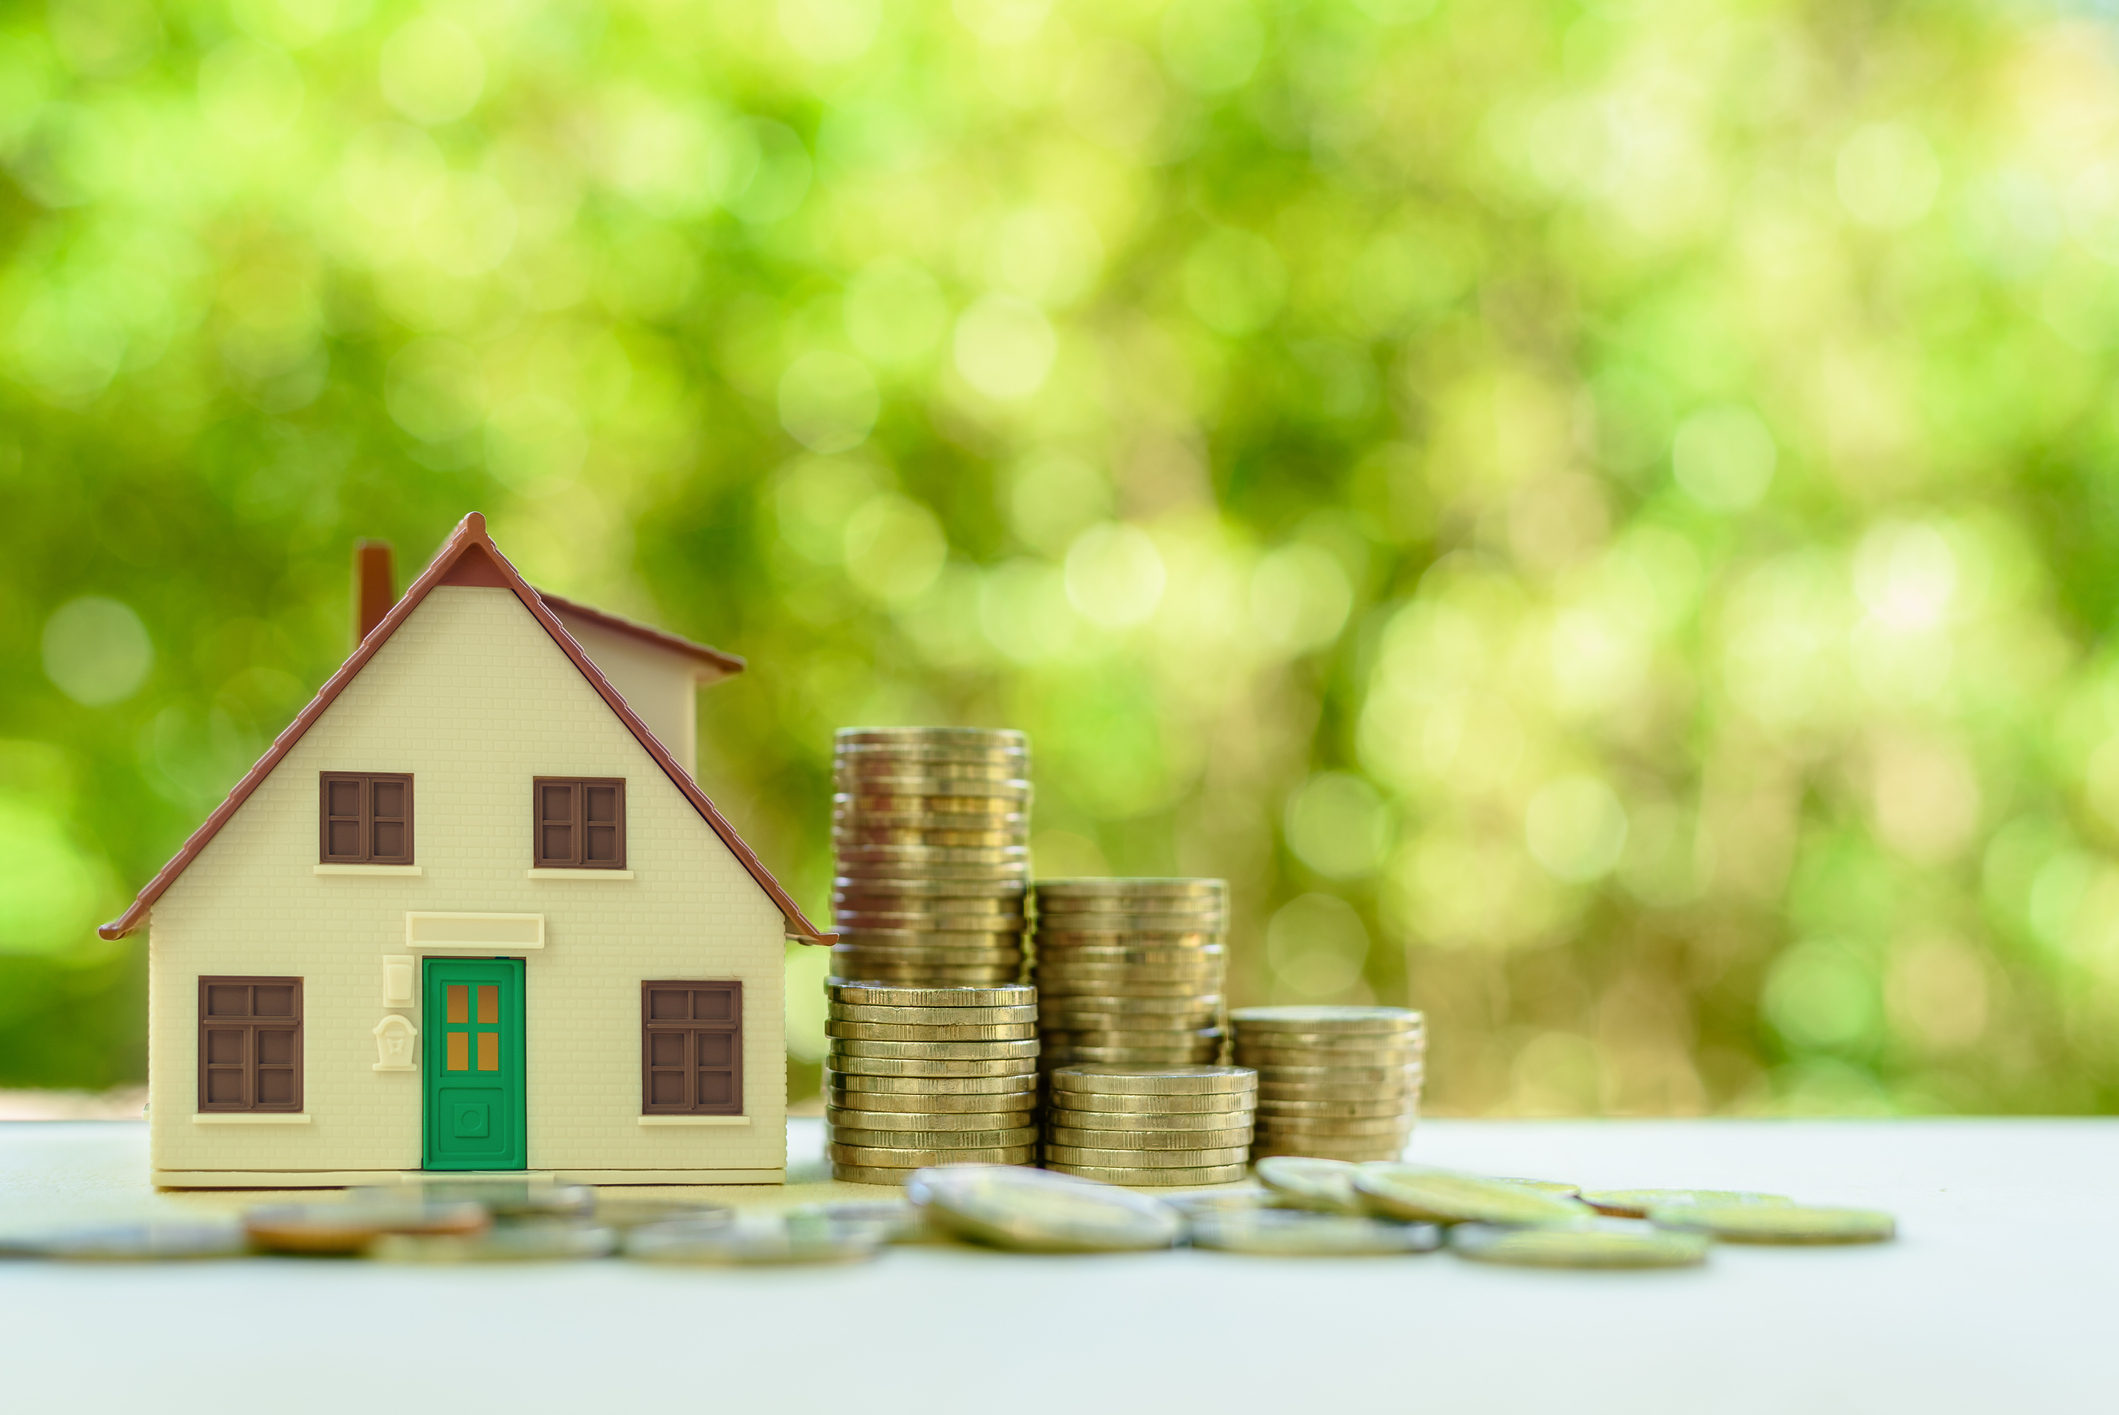 Property investment / reverse mortgage, financial concept : Small home or house model with green door and stacks of rising coins, depicts saving money to buy a new residential asset, human basic needs